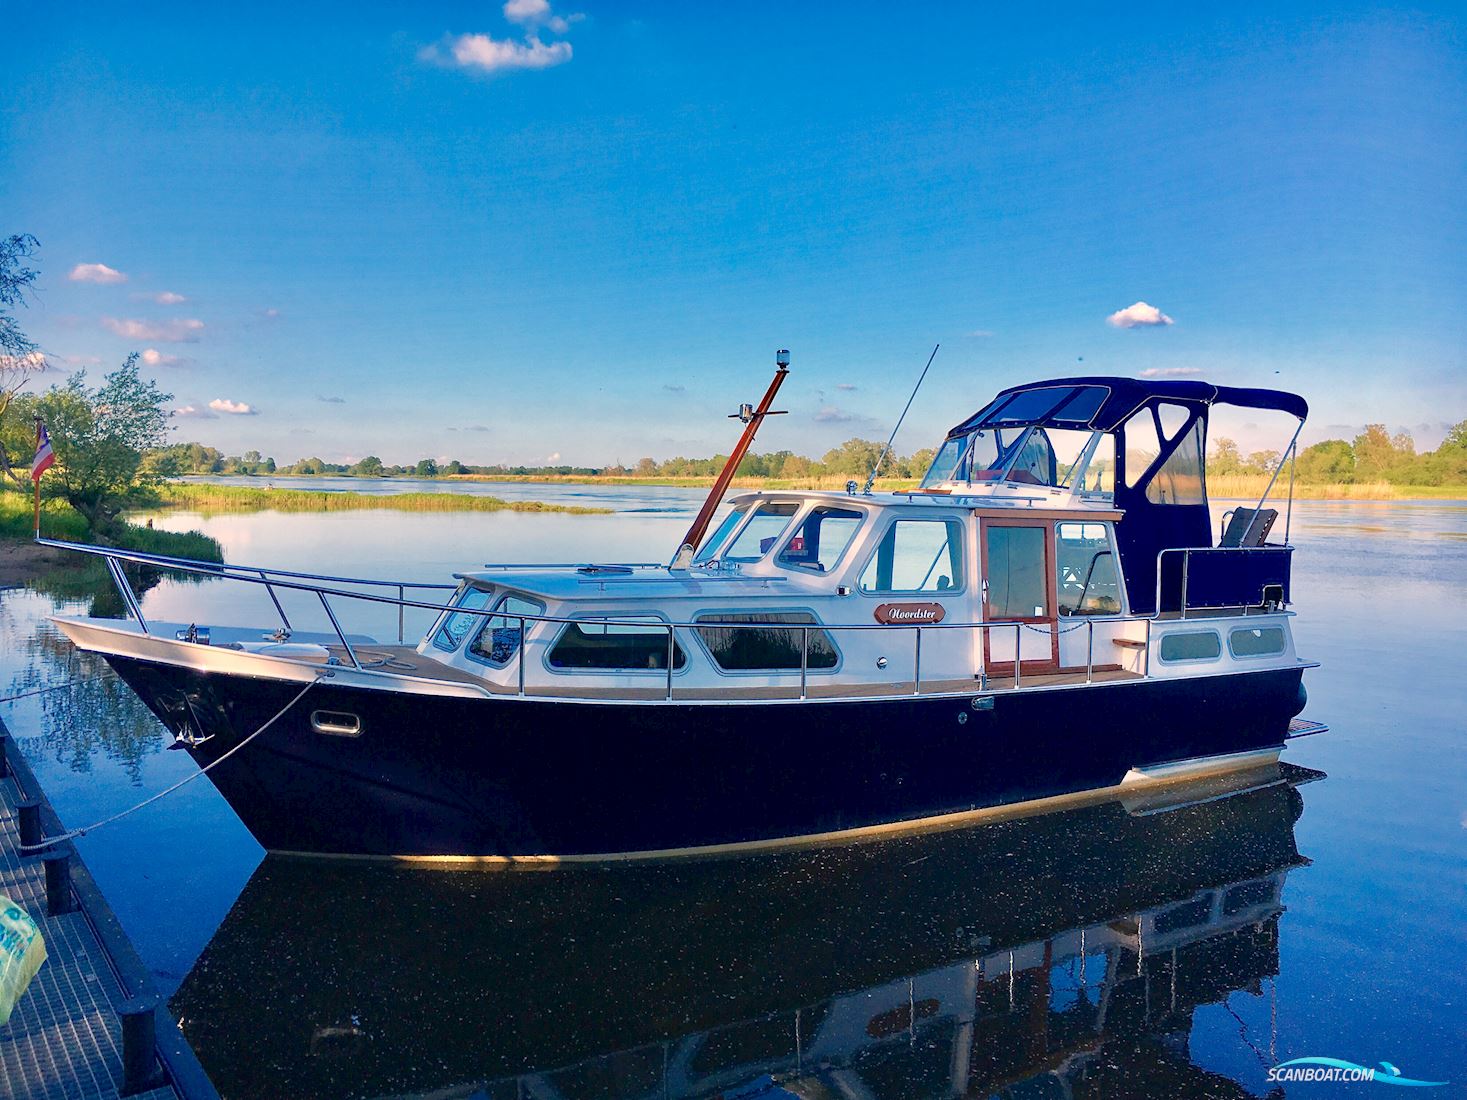 Marne Kruiser AC 1050 Motor boat 1983, with Indenor XD 4.88 engine, Germany